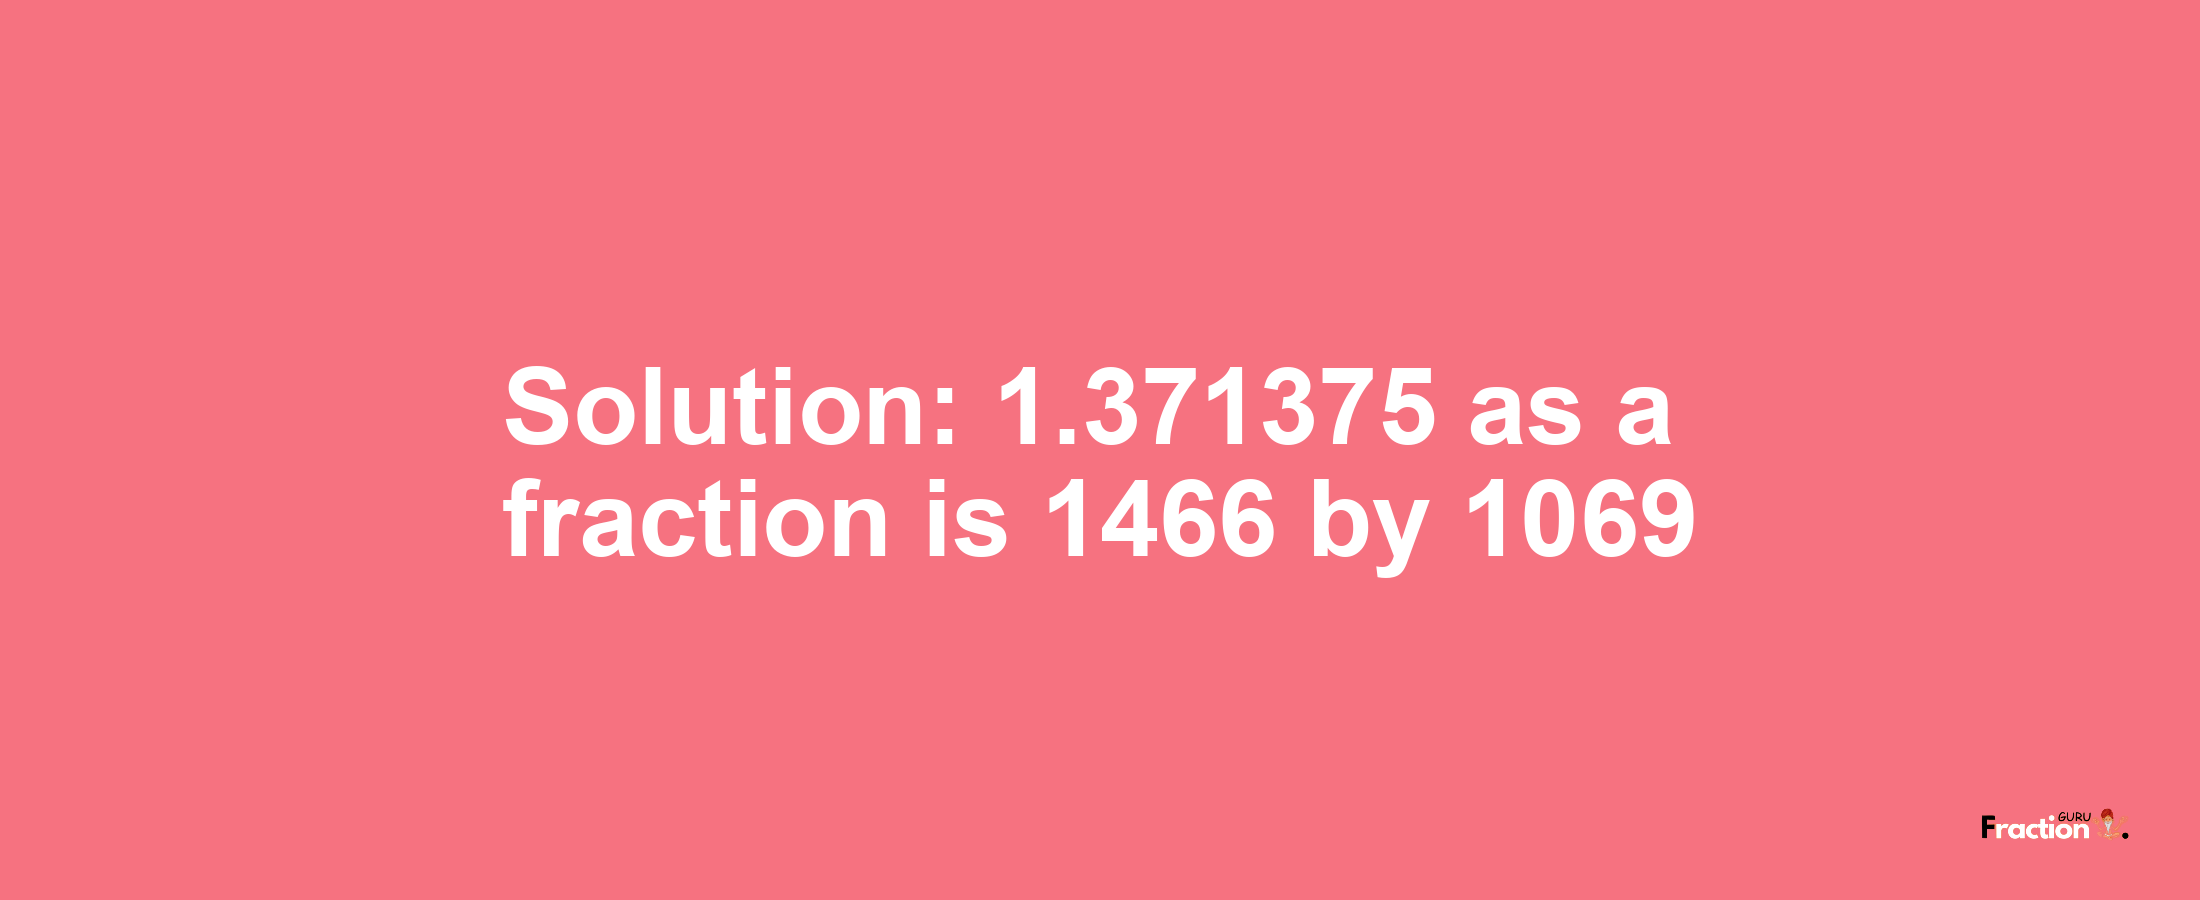 Solution:1.371375 as a fraction is 1466/1069